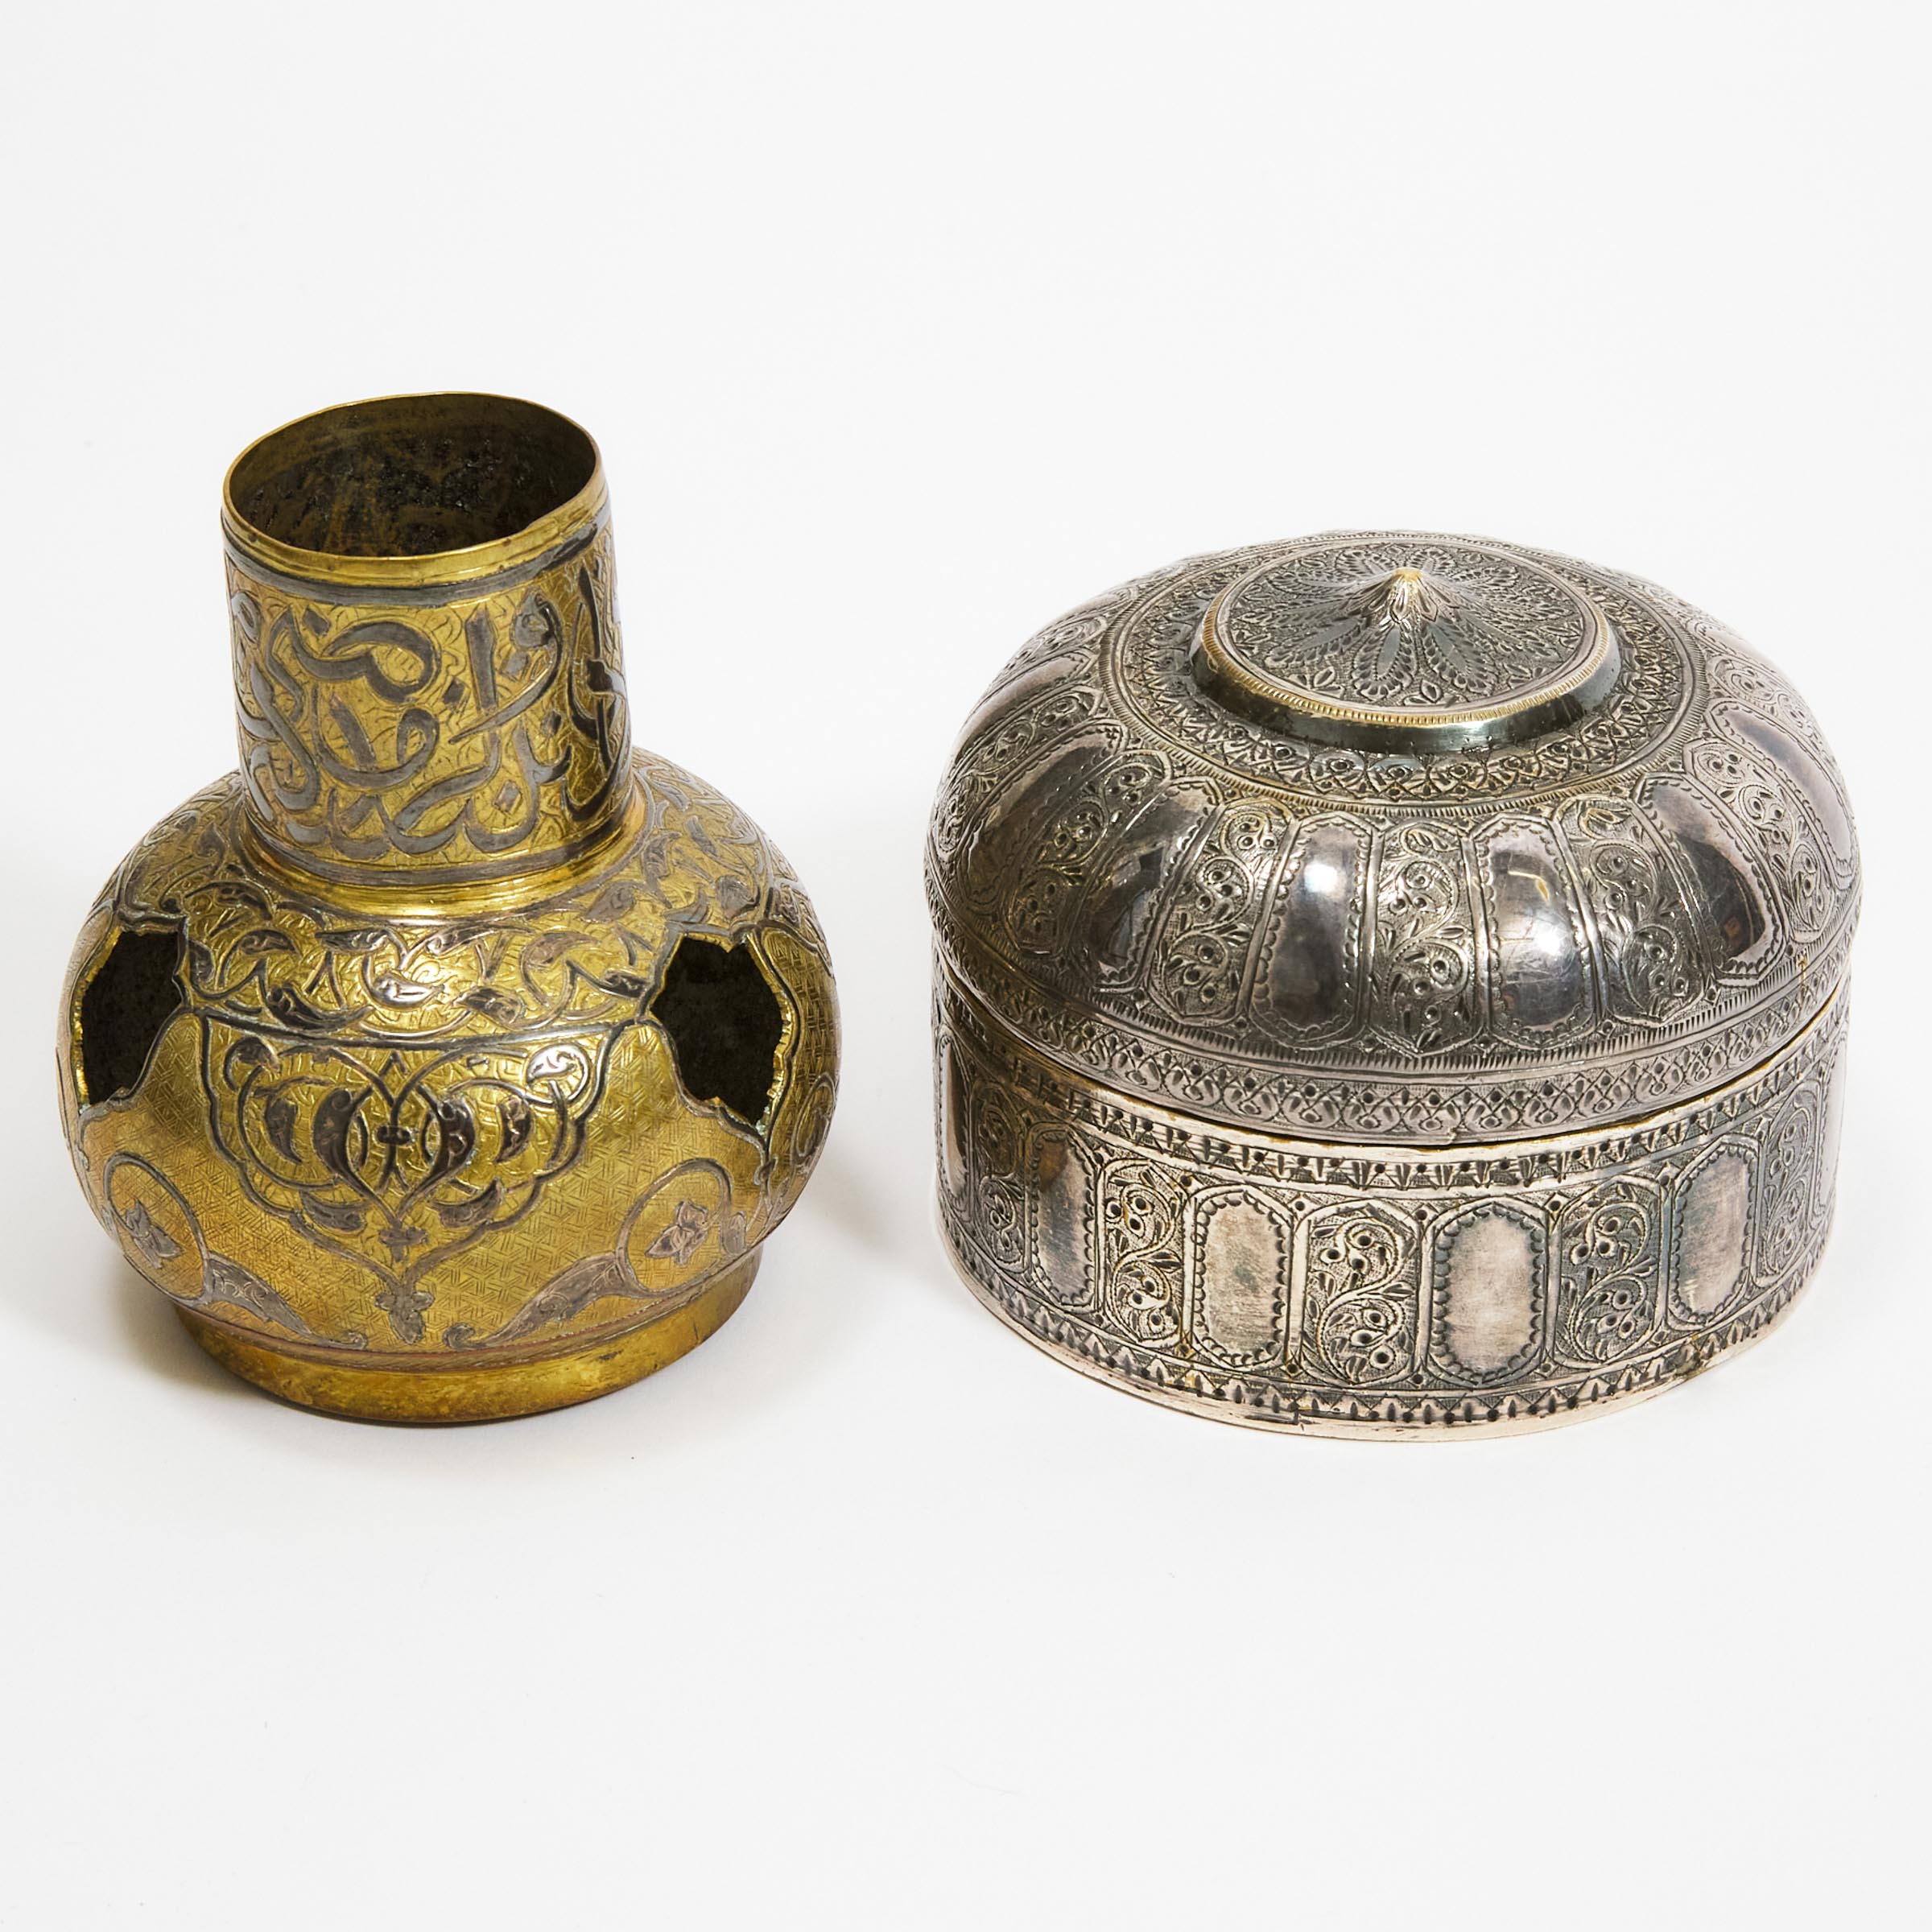 Two Islamic Silvered Metal Vessels, 19th/20th Century